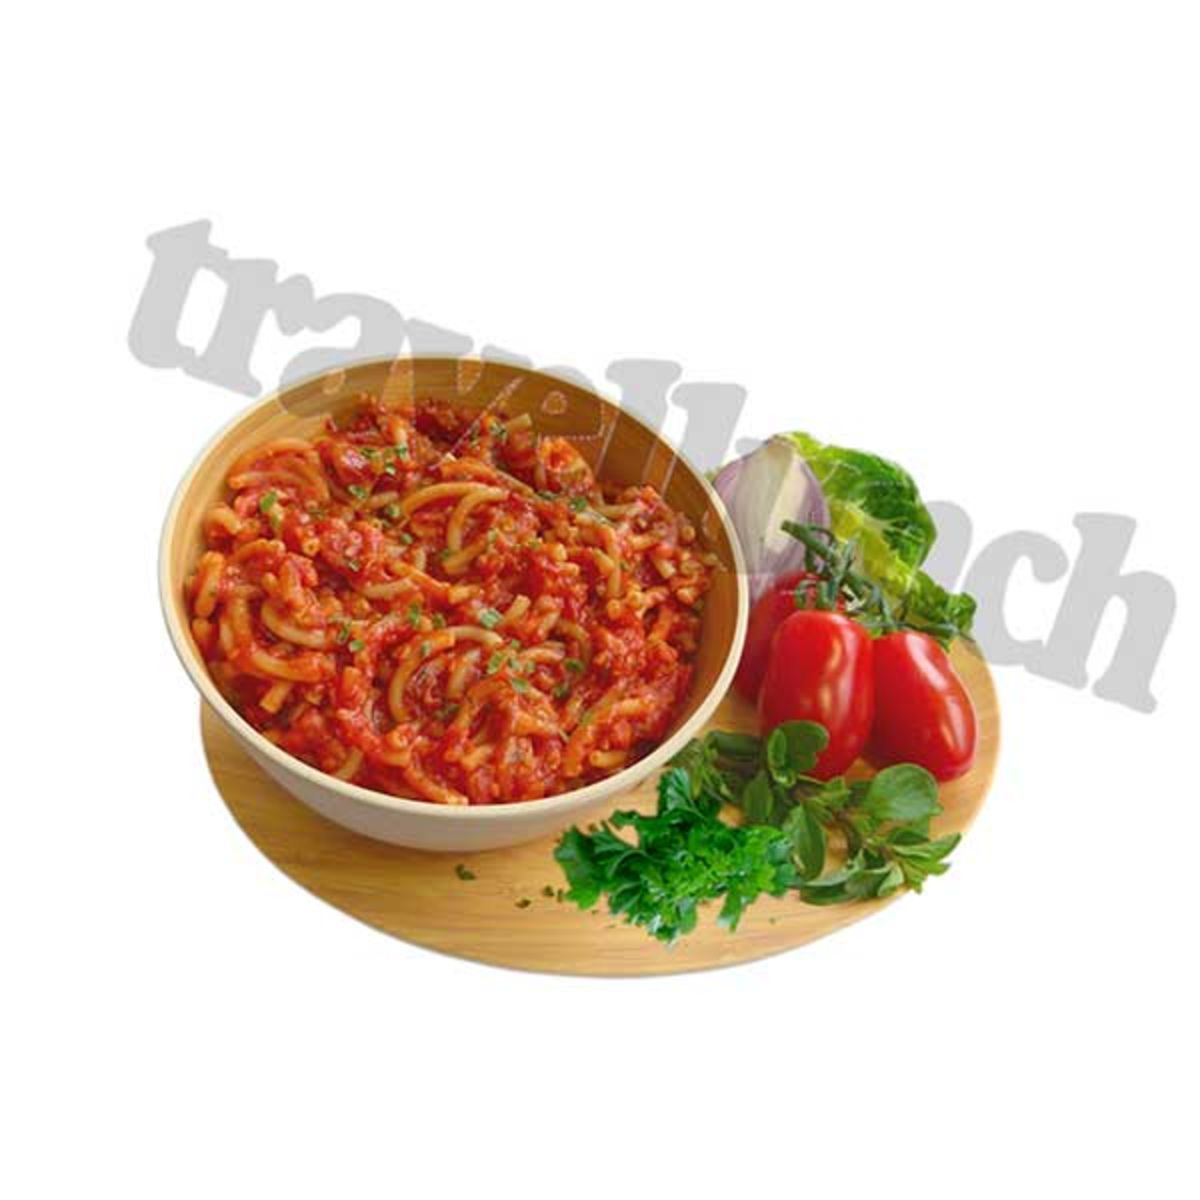 Pasta bolognese with beef - Double serving